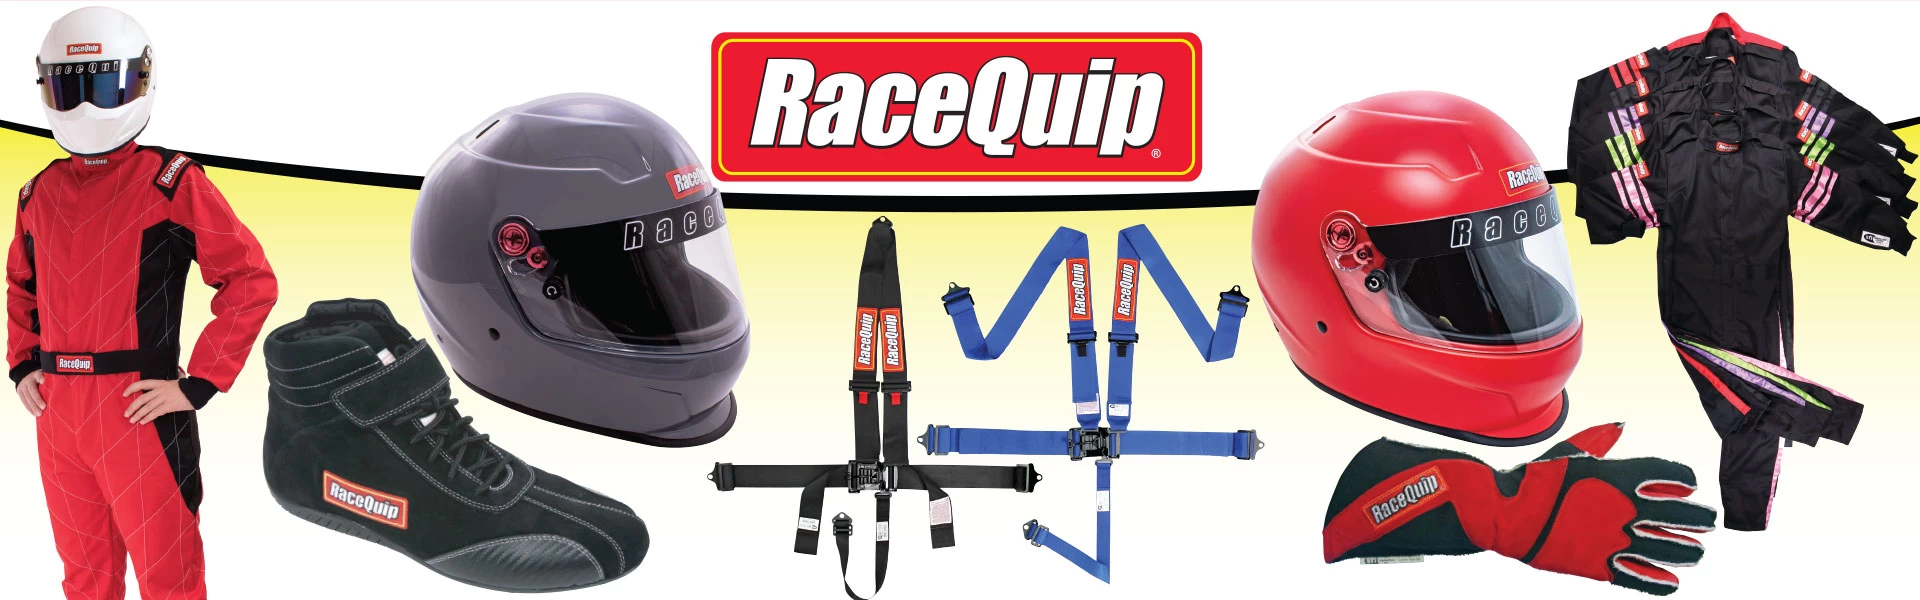 RaceQuip racing safety gear available at Day Motor Sports.